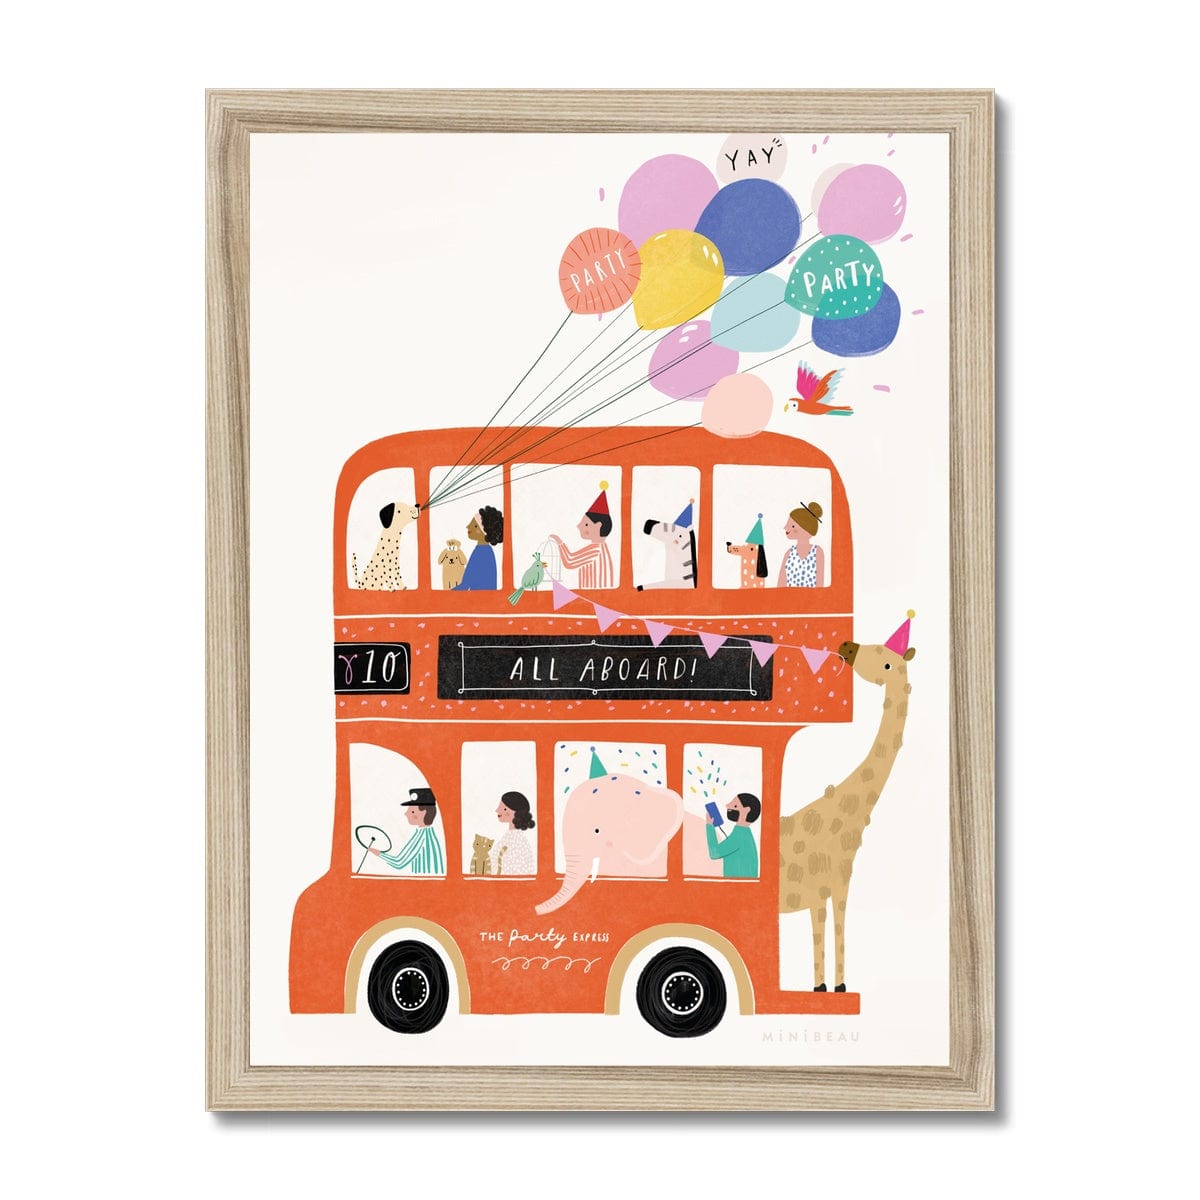 Art print in natural wood frame. Our double decker bus art print features a Red double decker party bus called The Party Express with people and animals aboard. There is a dalmation holding a bunch of balloons out of a top window, a zebra wearing a blue party hat sitting upstairs, elephant hanging out of a downstairs window and a giraffe holding bunting on the back of the bus. There is a cat on the lower deck and a man firing confetti over the elephant.